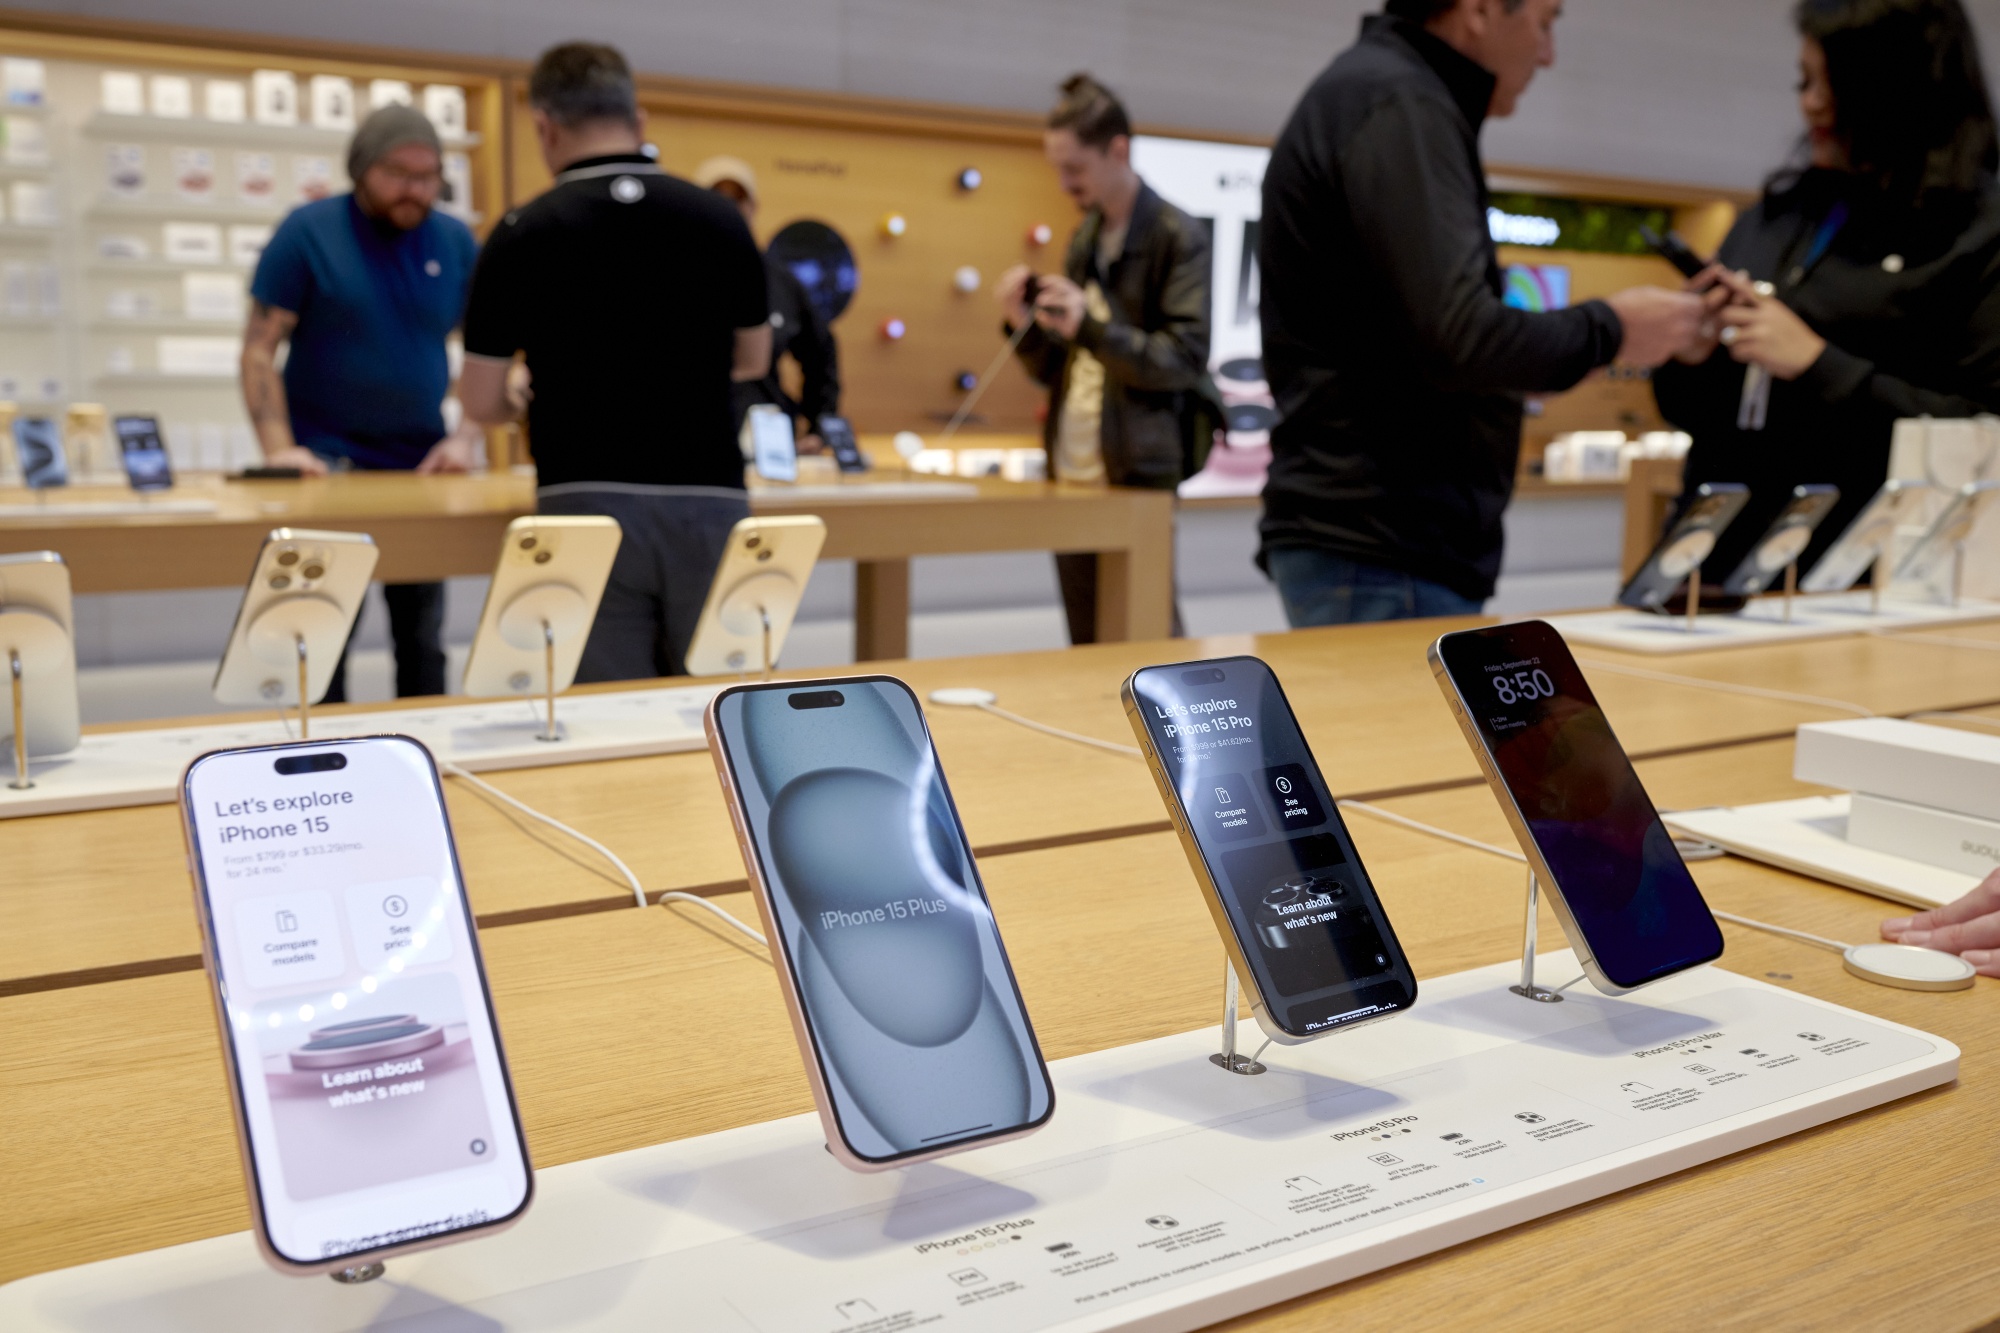 iPhone Sales in China Have Declined by Double Digits, Jefferies Says